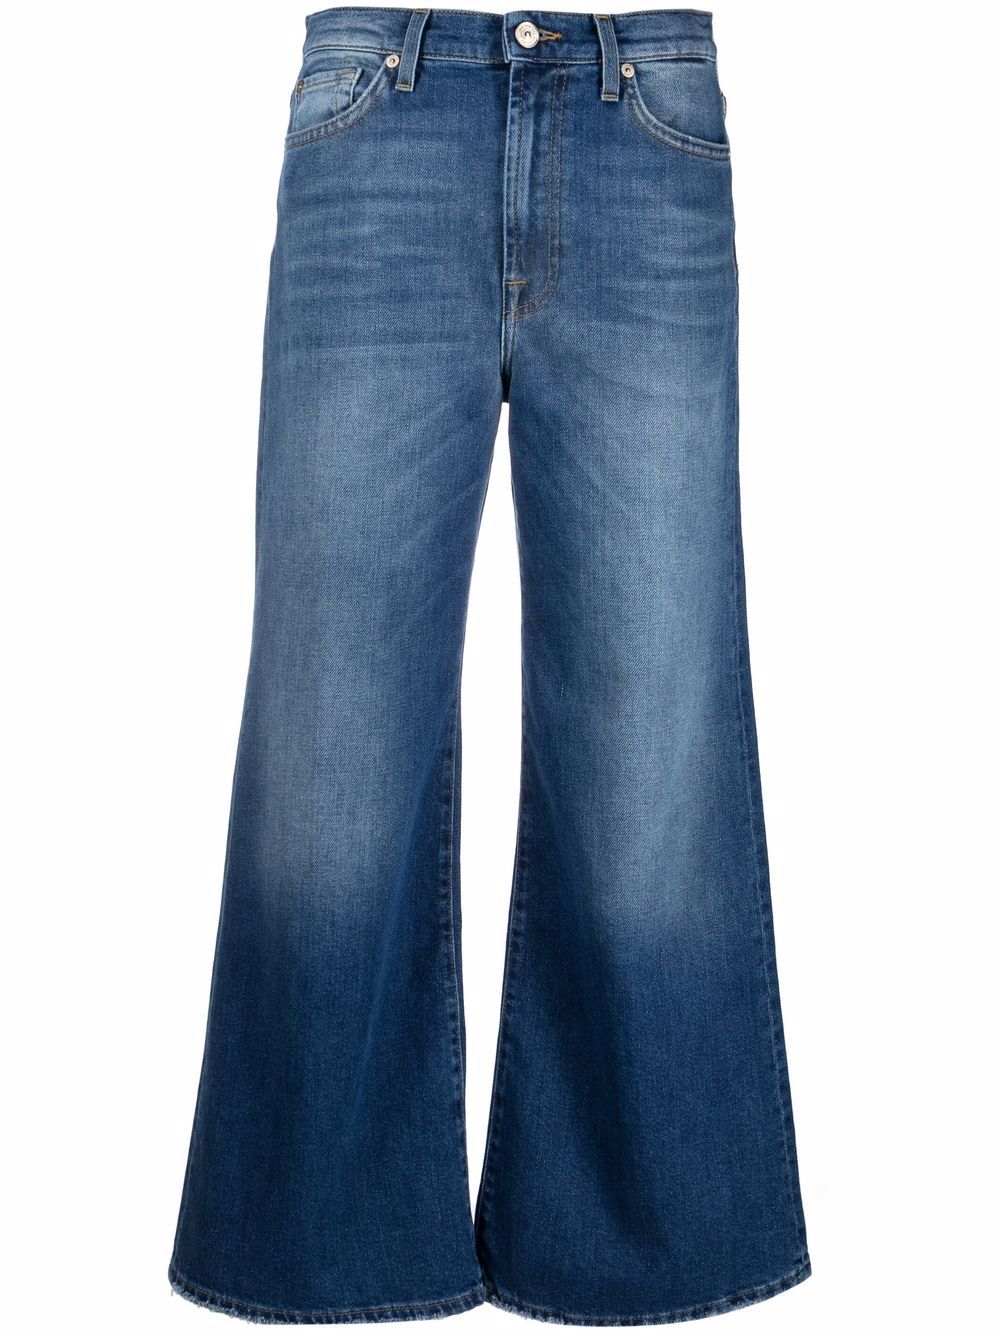 7 For All Mankind The Cropped Jo Raindrop Jeans - Farfetch